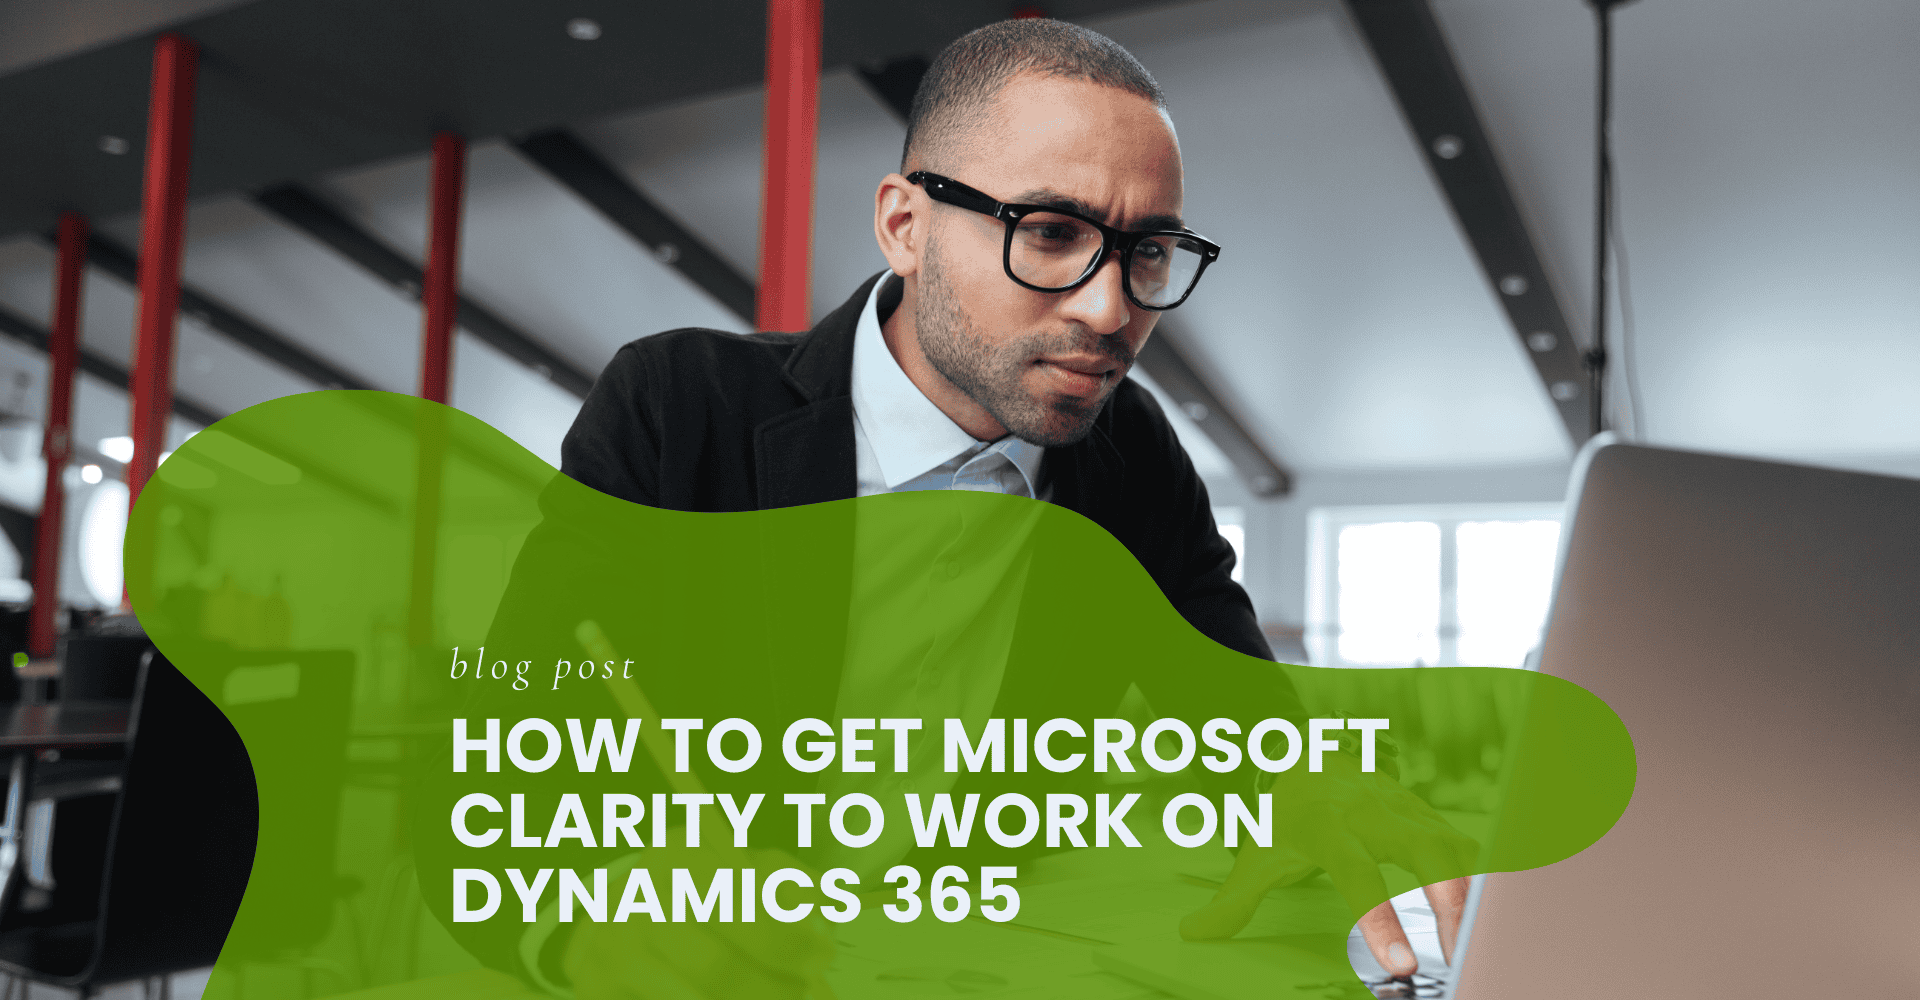 How to get Microsoft Clarity to work on Dynamics 365